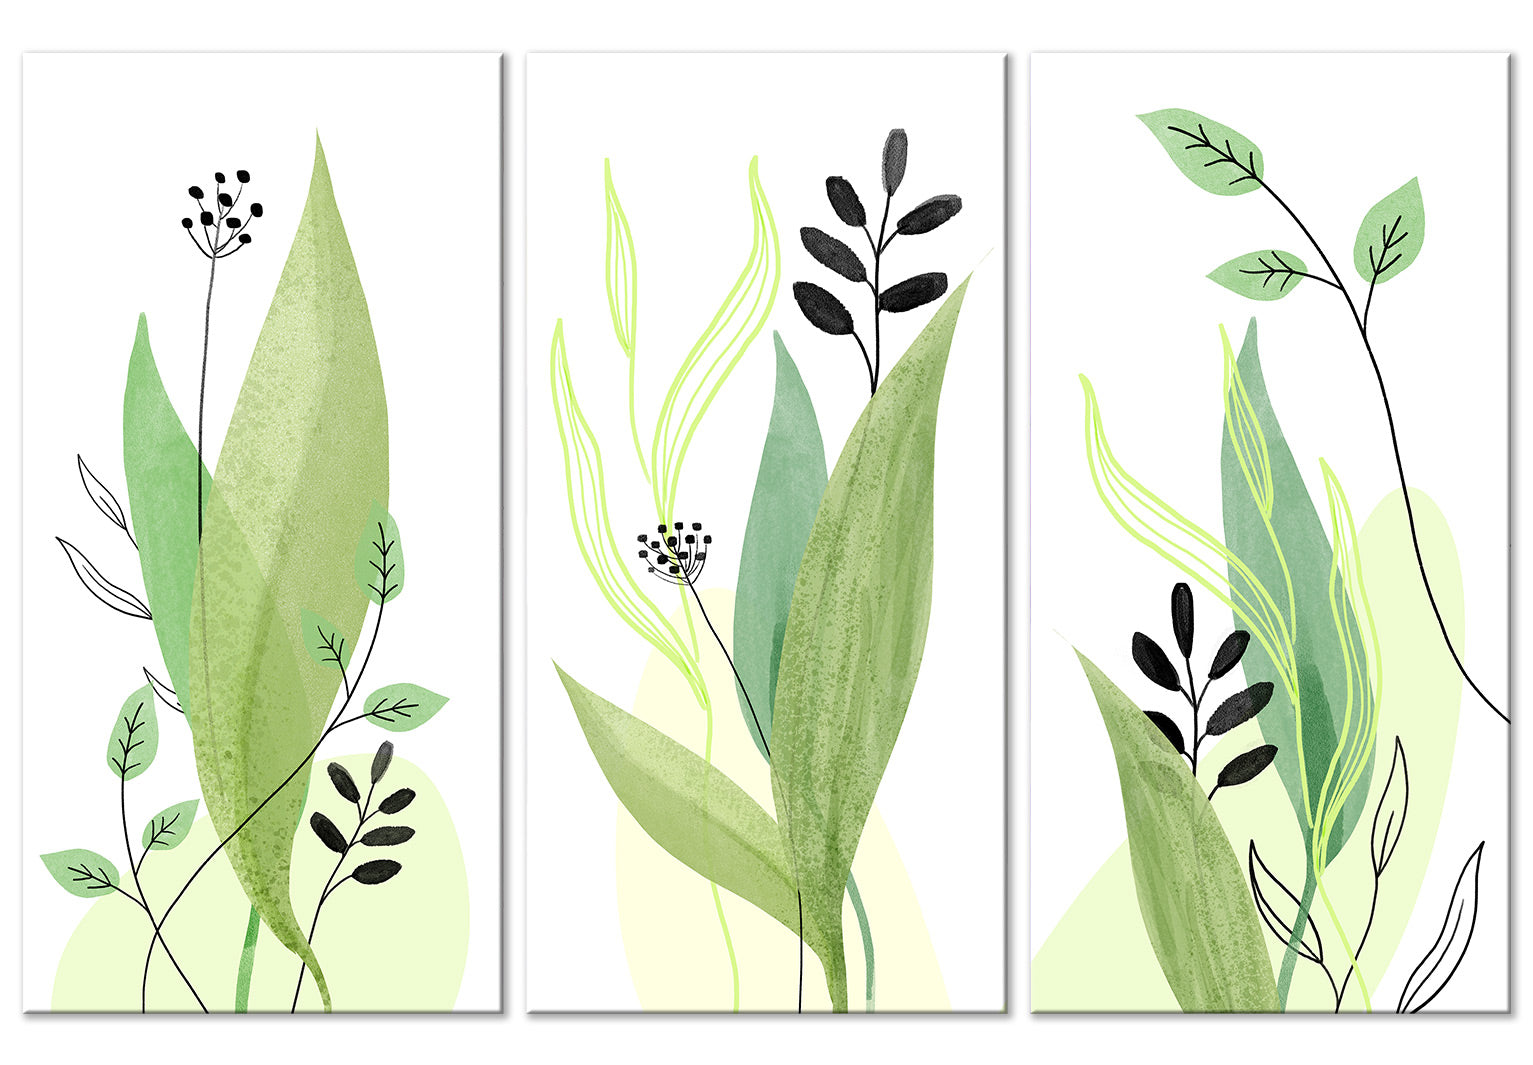 Botanical Canvas Wall Art - Green Day - 3 Pieces